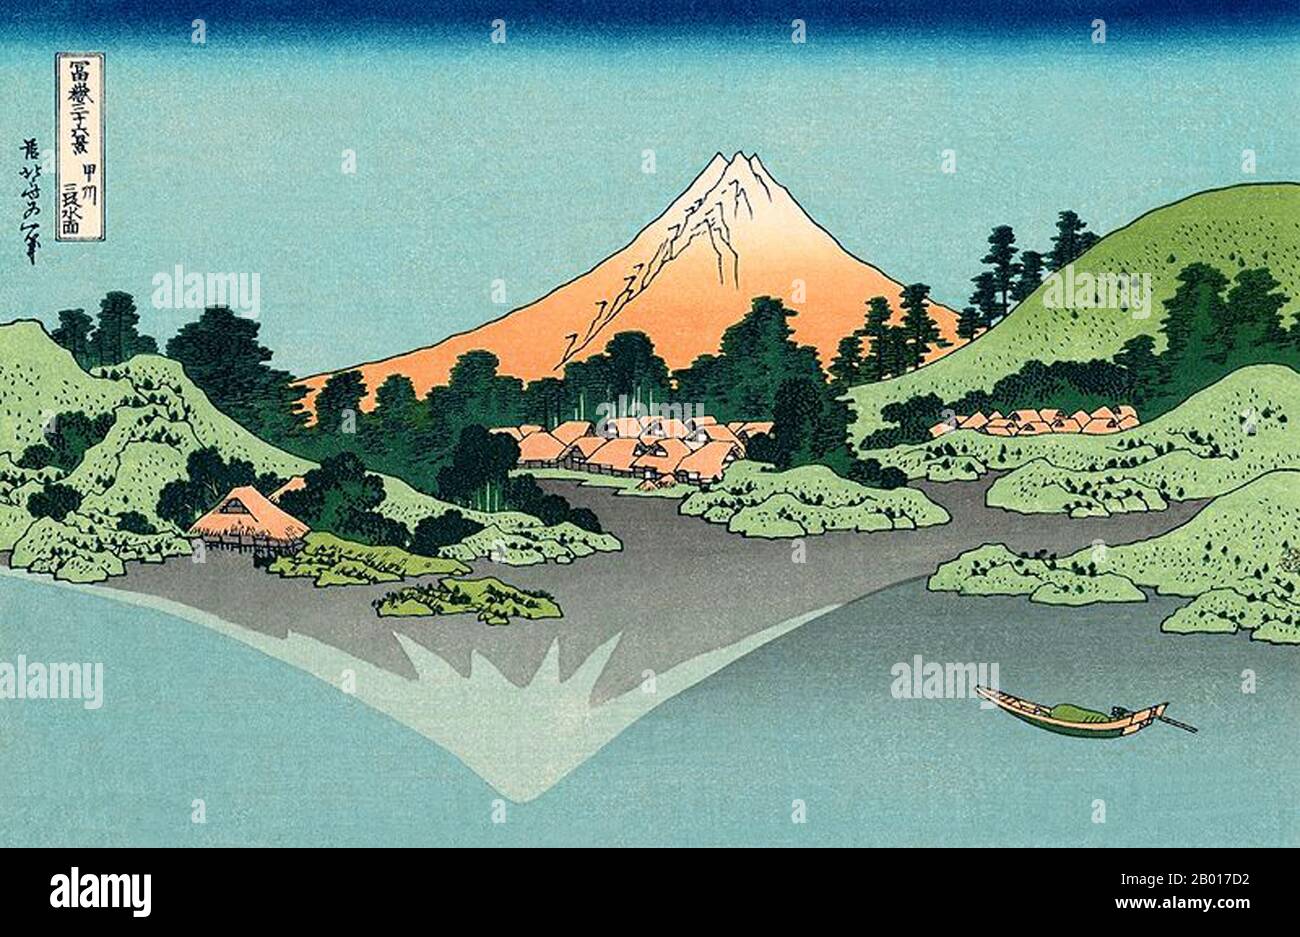 Japan: ‘Reflection of Mount Fuji in Lake Kawaguchi Seen from the Misaka Pass in Kai Province’. Ukiyo-e woodblock print from the series ‘Thirty-Six Views of Mount Fuji’ by Katsushika Hokusai (31 October 1760 - 10 May 1849), 1830.  ‘Thirty-six Views of Mount Fuji’ is an ‘ukiyo-e’ series of woodcut prints by Japanese artist Katsushika Hokusai. The series depicts Mount Fuji in differing seasons and weather conditions from a variety of places and distances. It actually consists of 46 prints created between 1826 and 1833. The first 36 were included in the original publication and 10 were added. Stock Photo